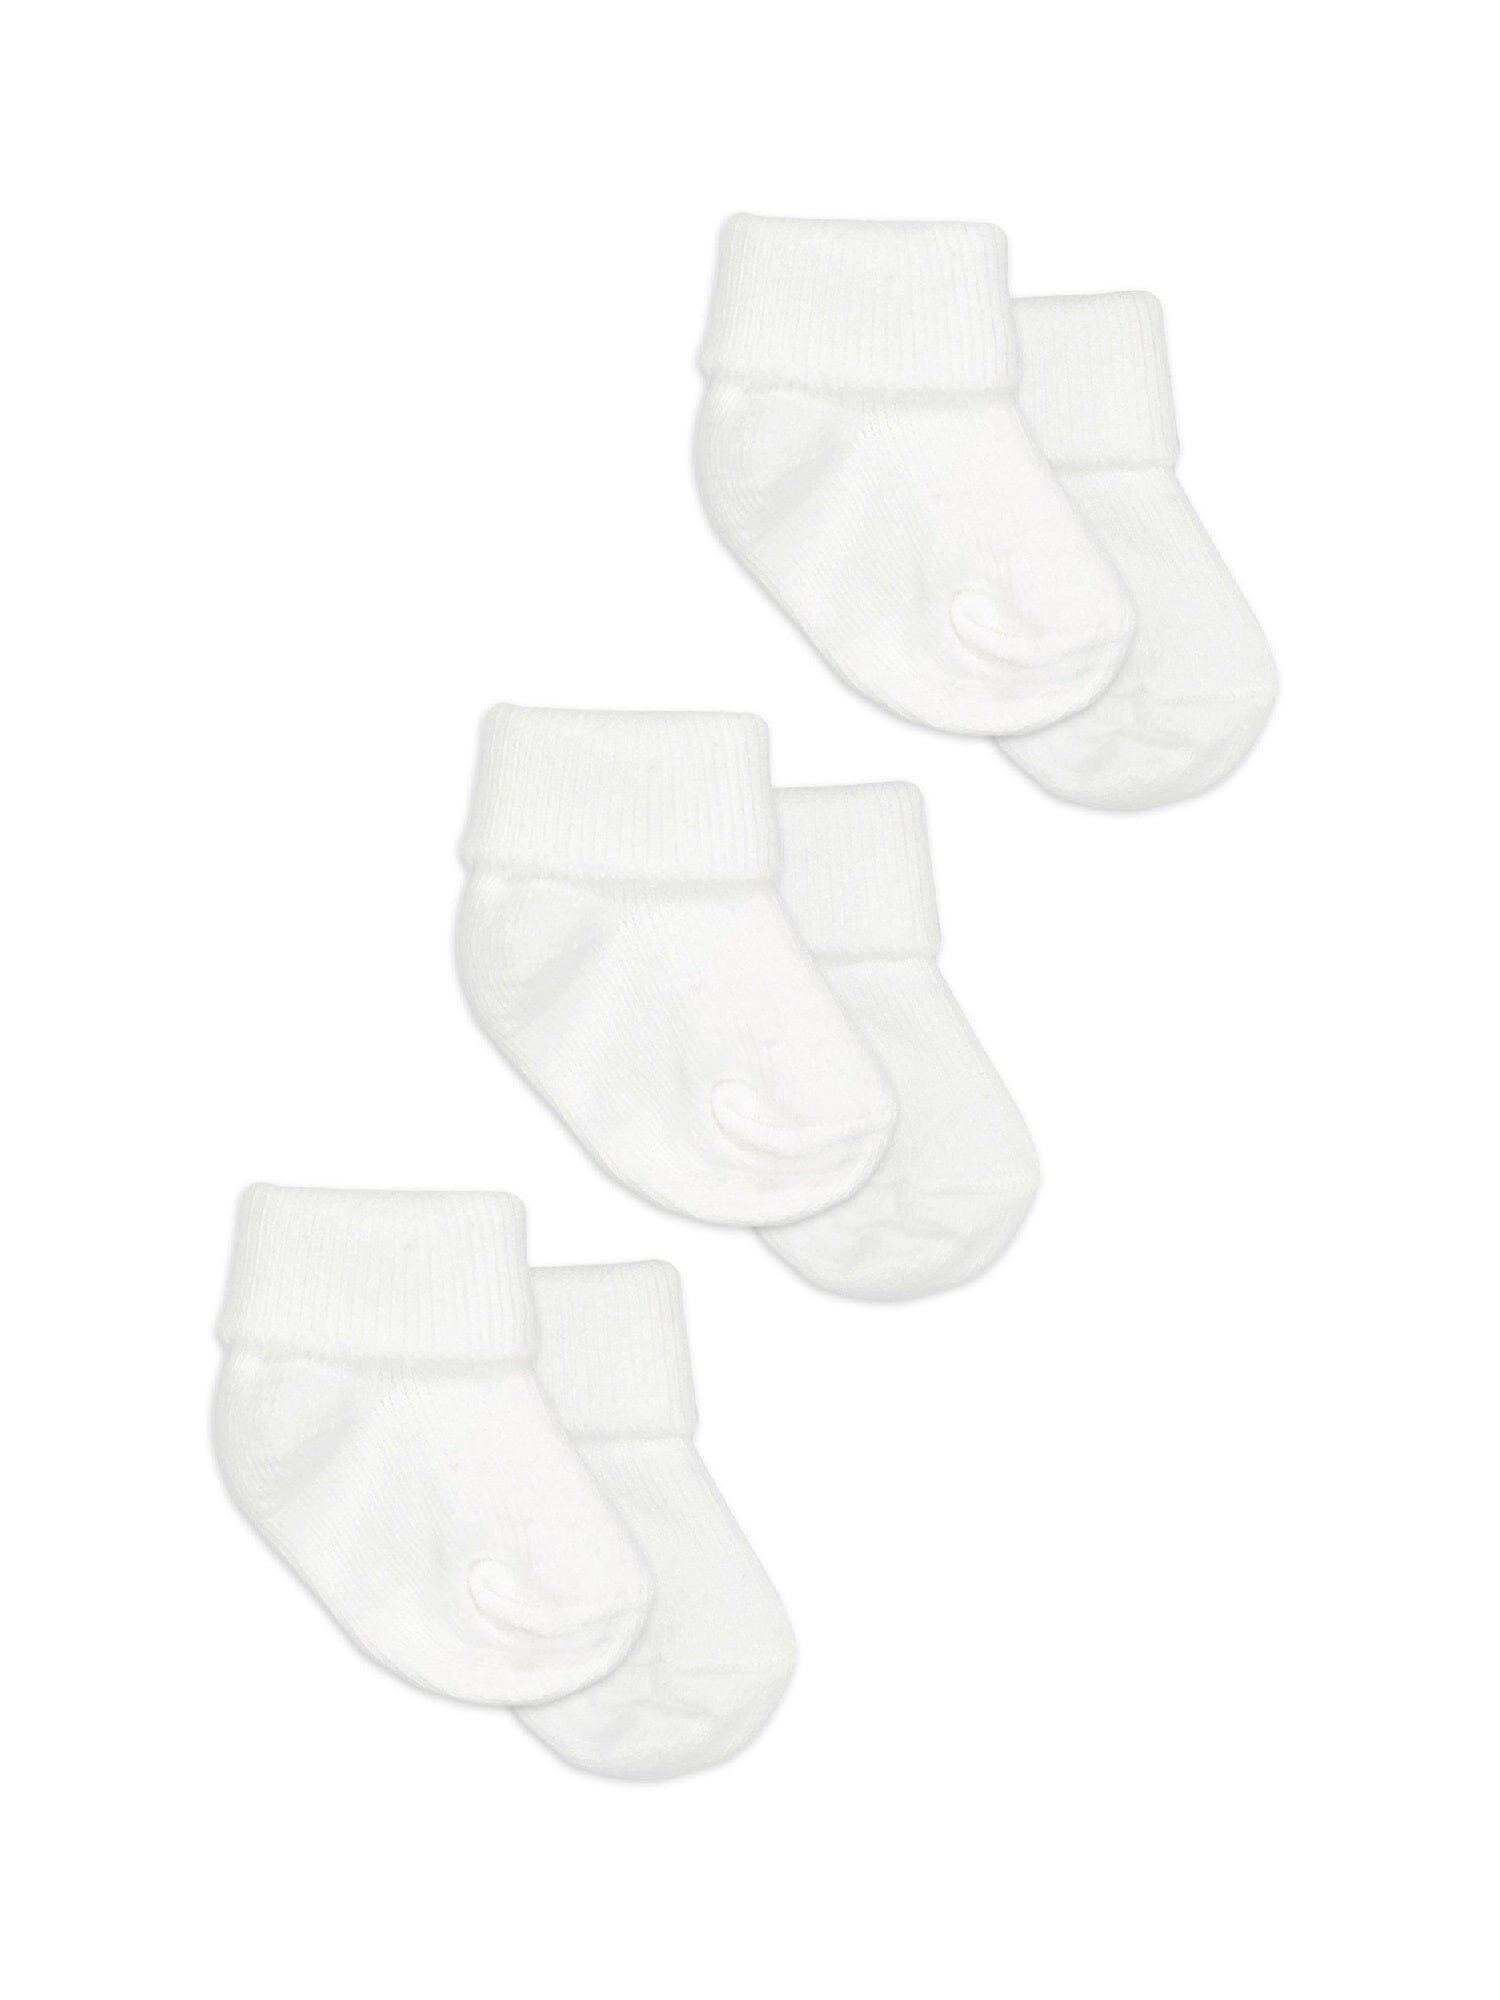 Tiny Baby Socks, White, 3 Pack Socks Little Mouse Baby Clothing & Gifts 